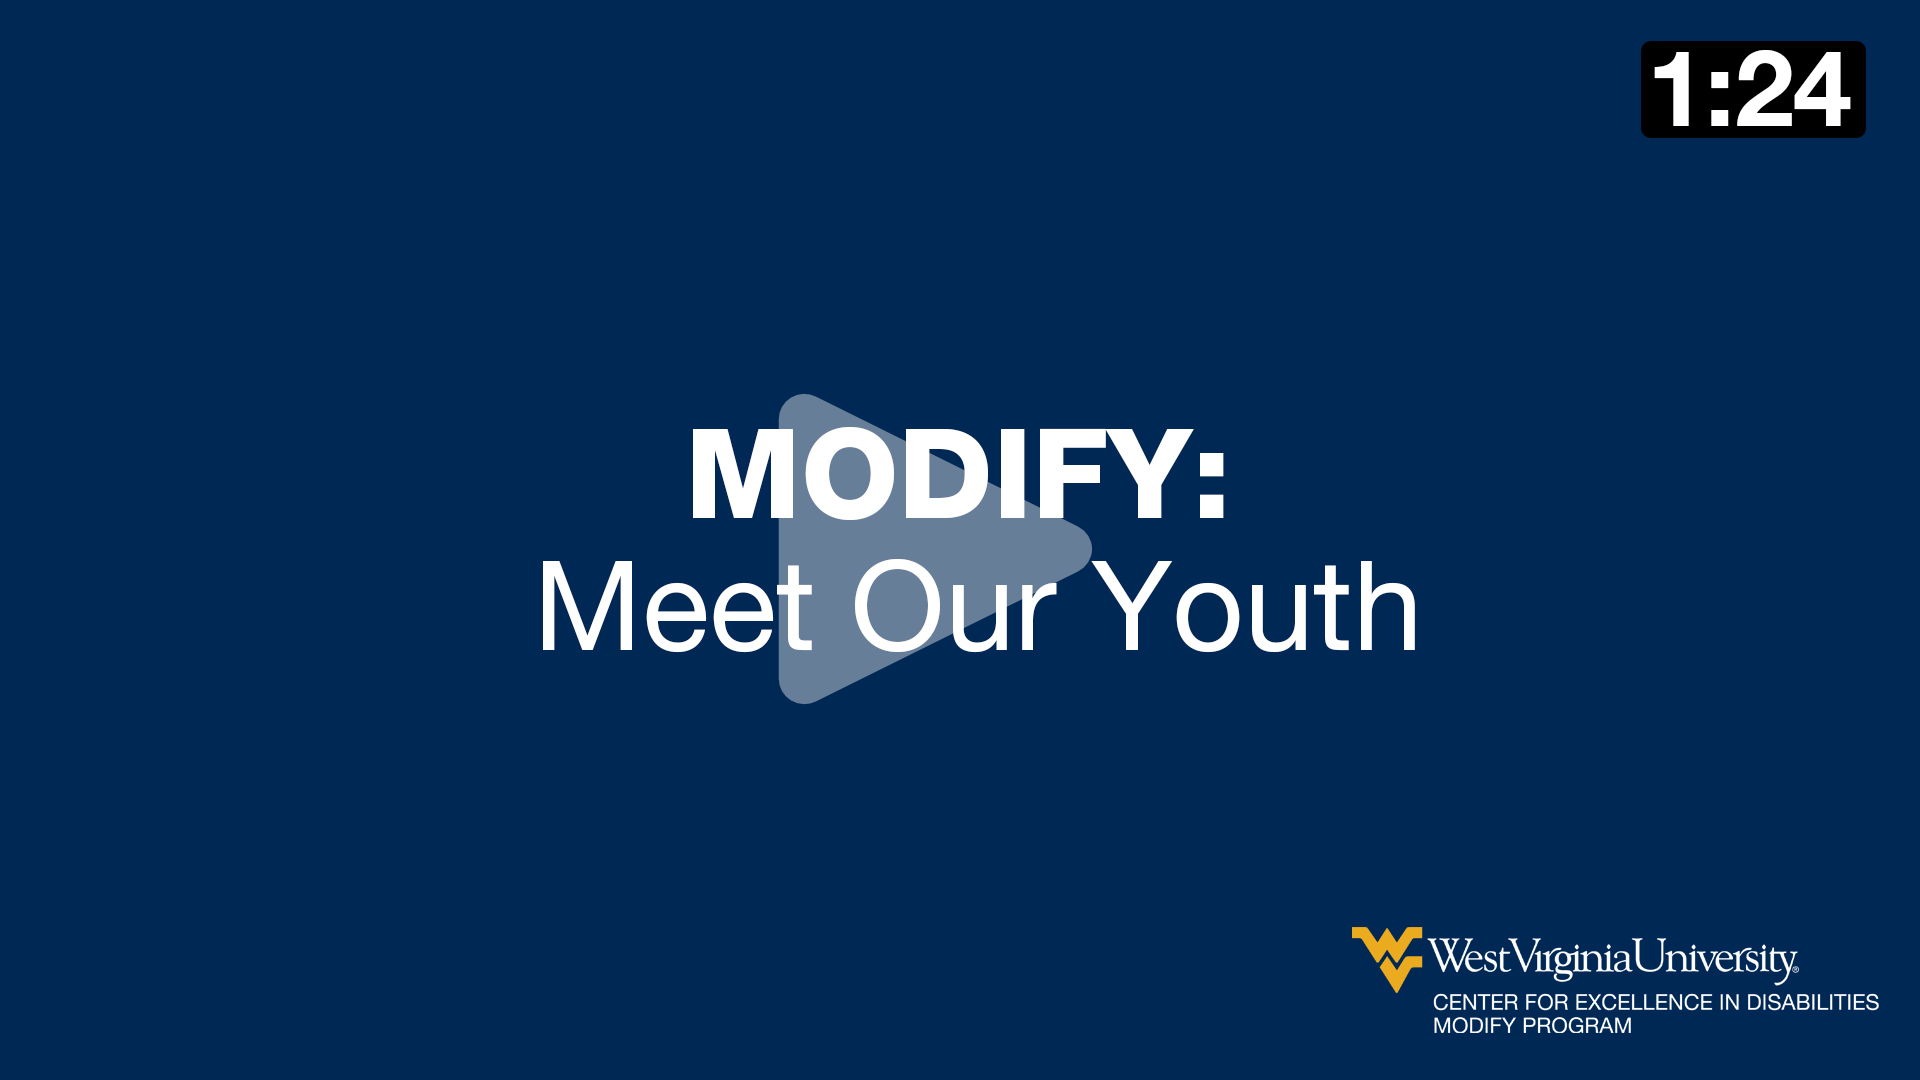 MODIFY: Meet our Youth